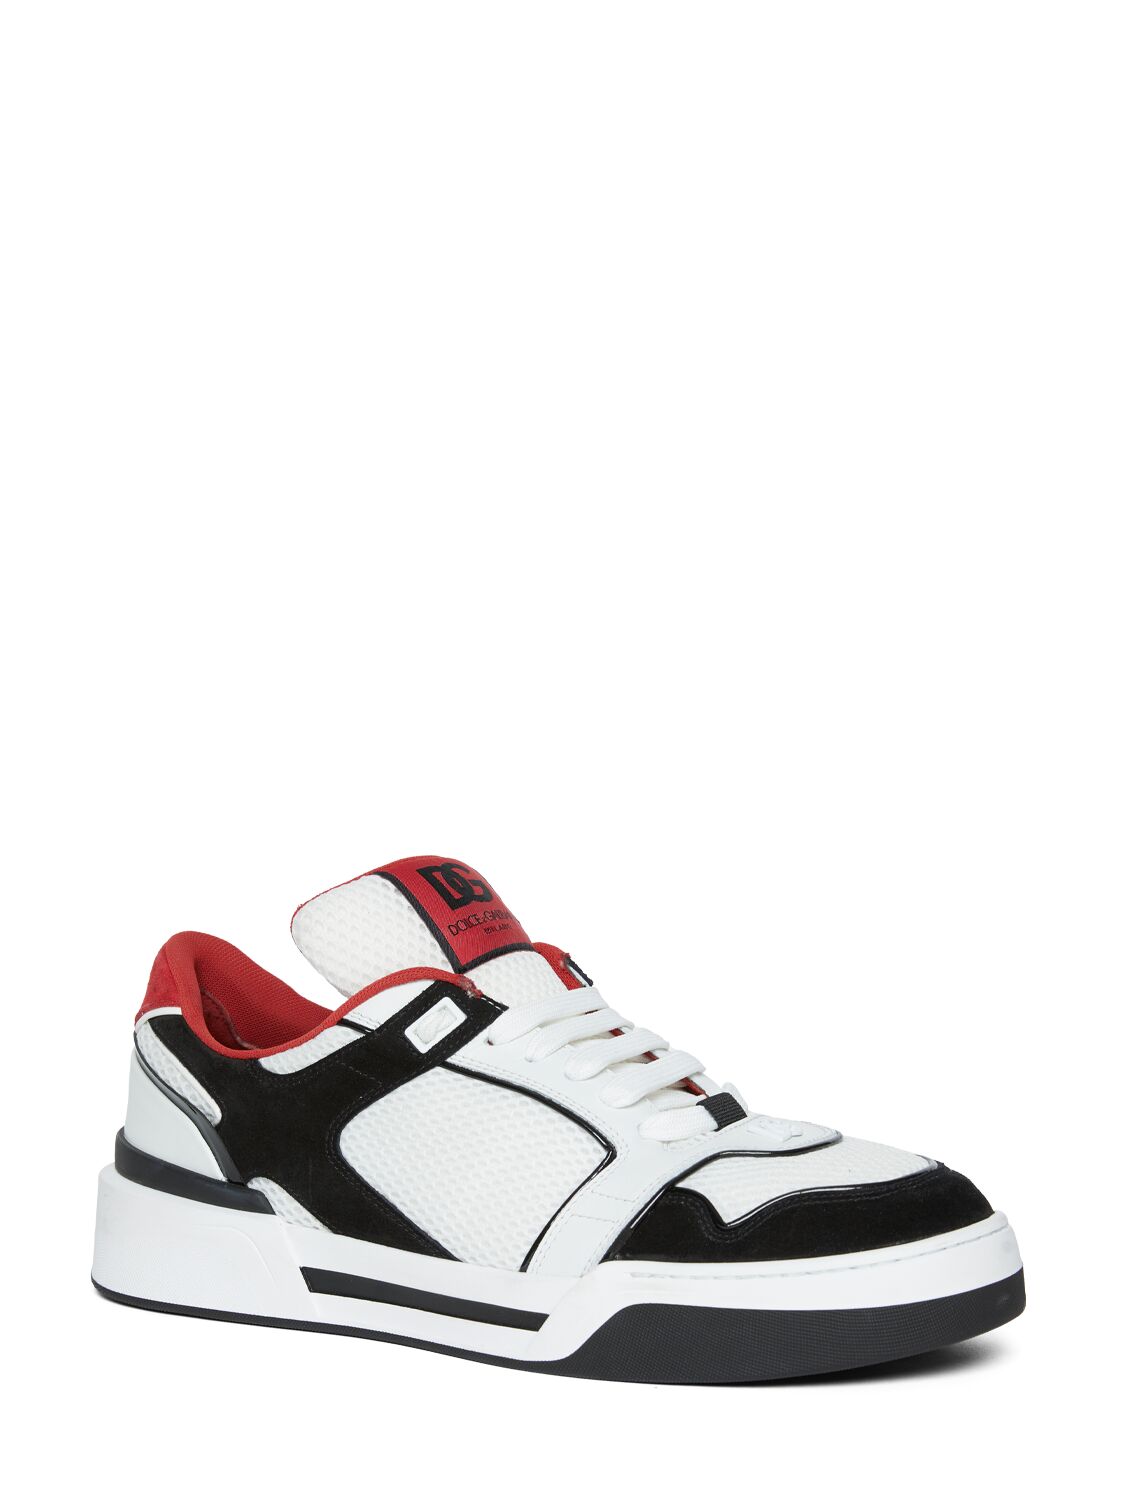 Shop Dolce & Gabbana New Roma Mesh & Suede Sneakers In Black,white